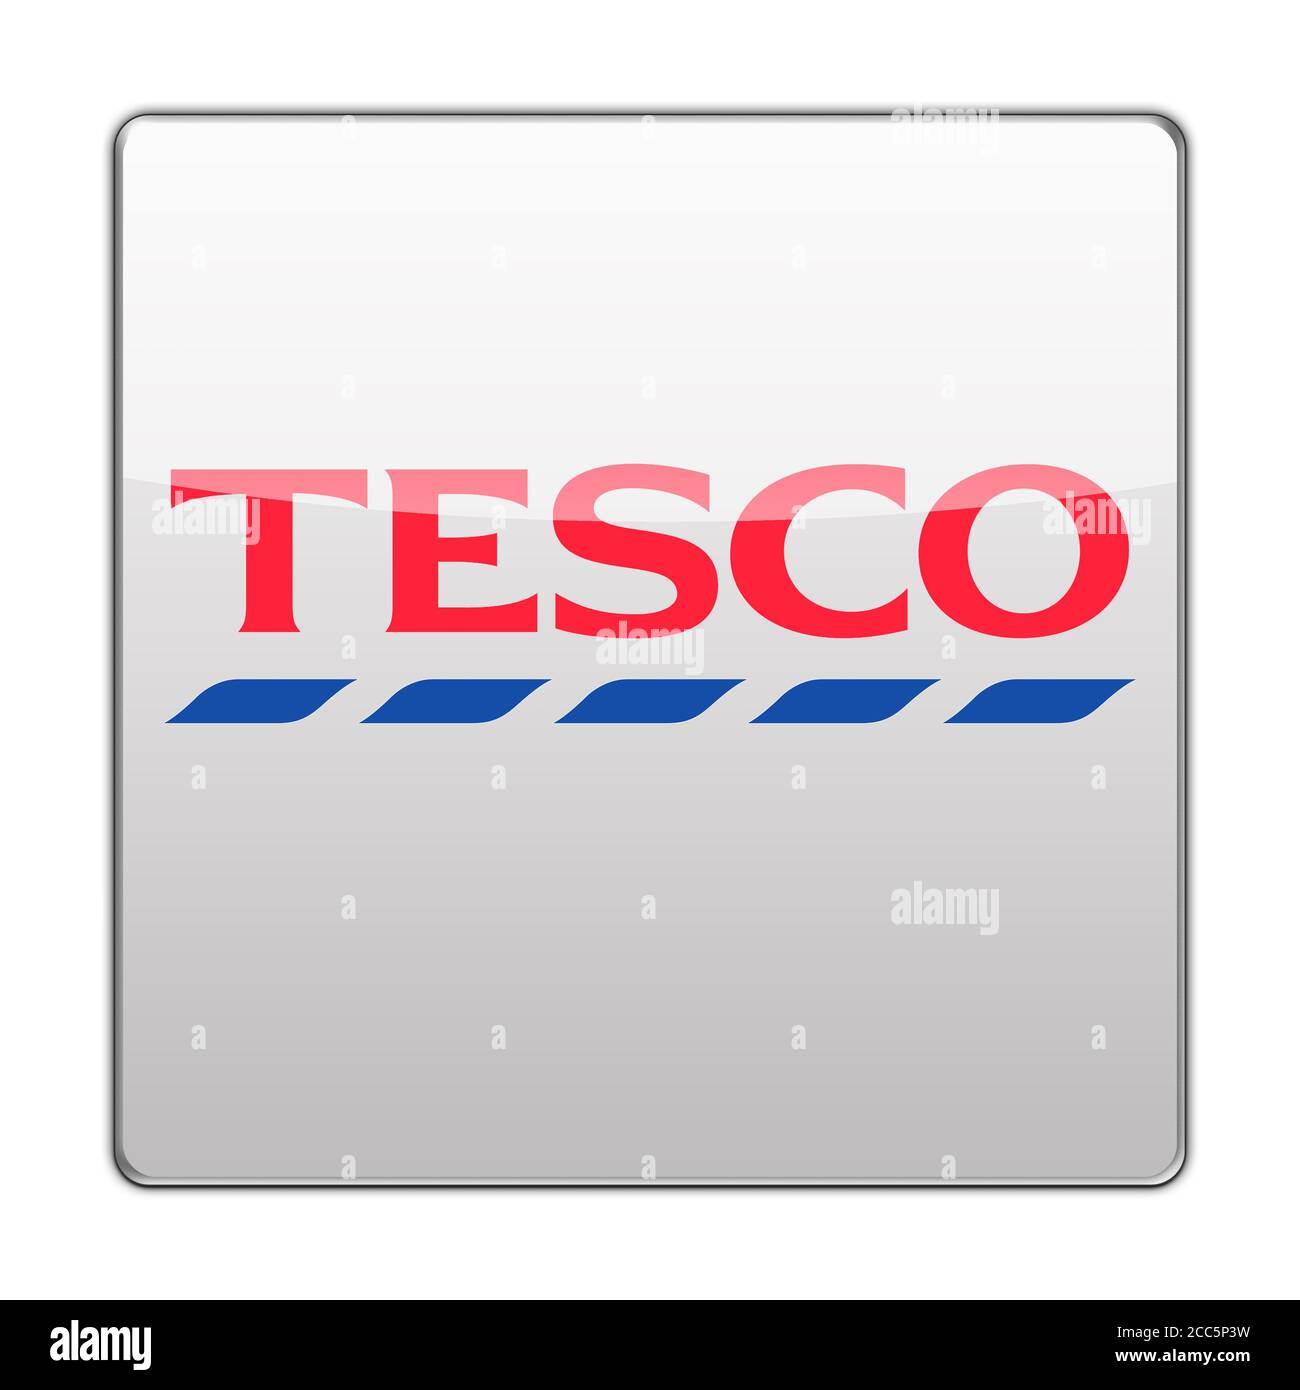 Tesco logo icon Cut Out Stock Images & Pictures - Alamy